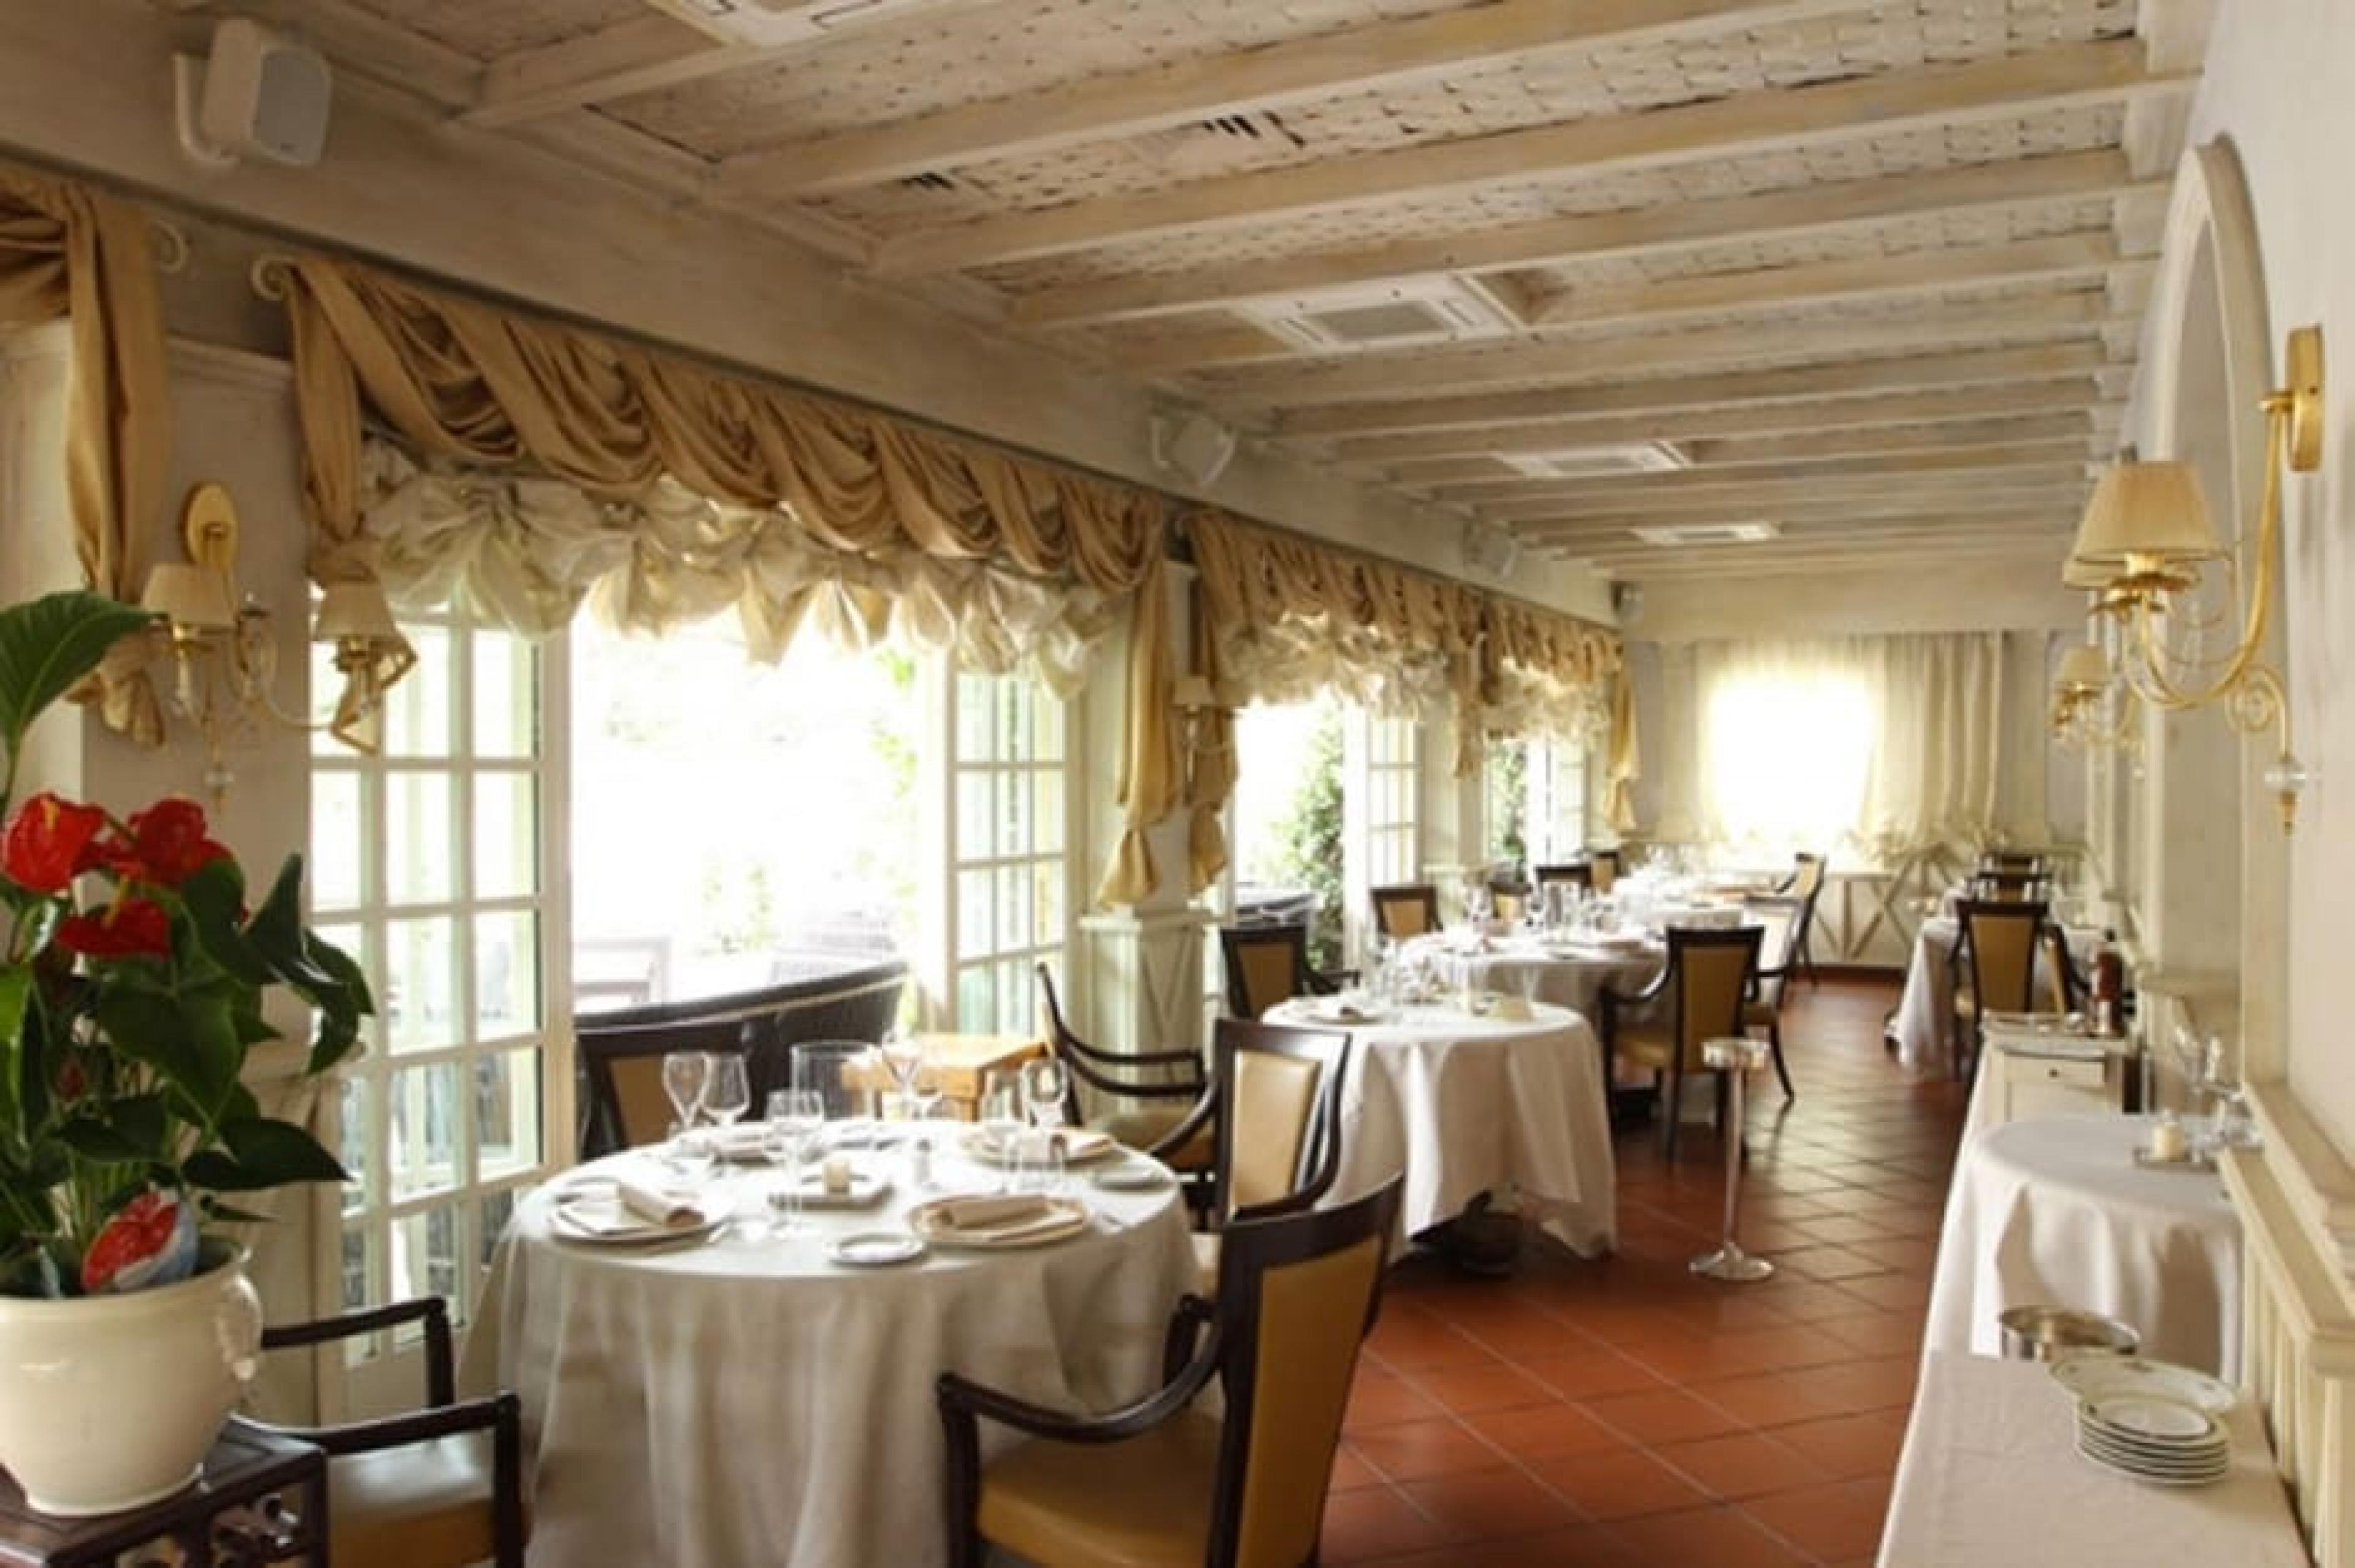 Dinning Area at Bistrot, Forte dei Marmi, Italy